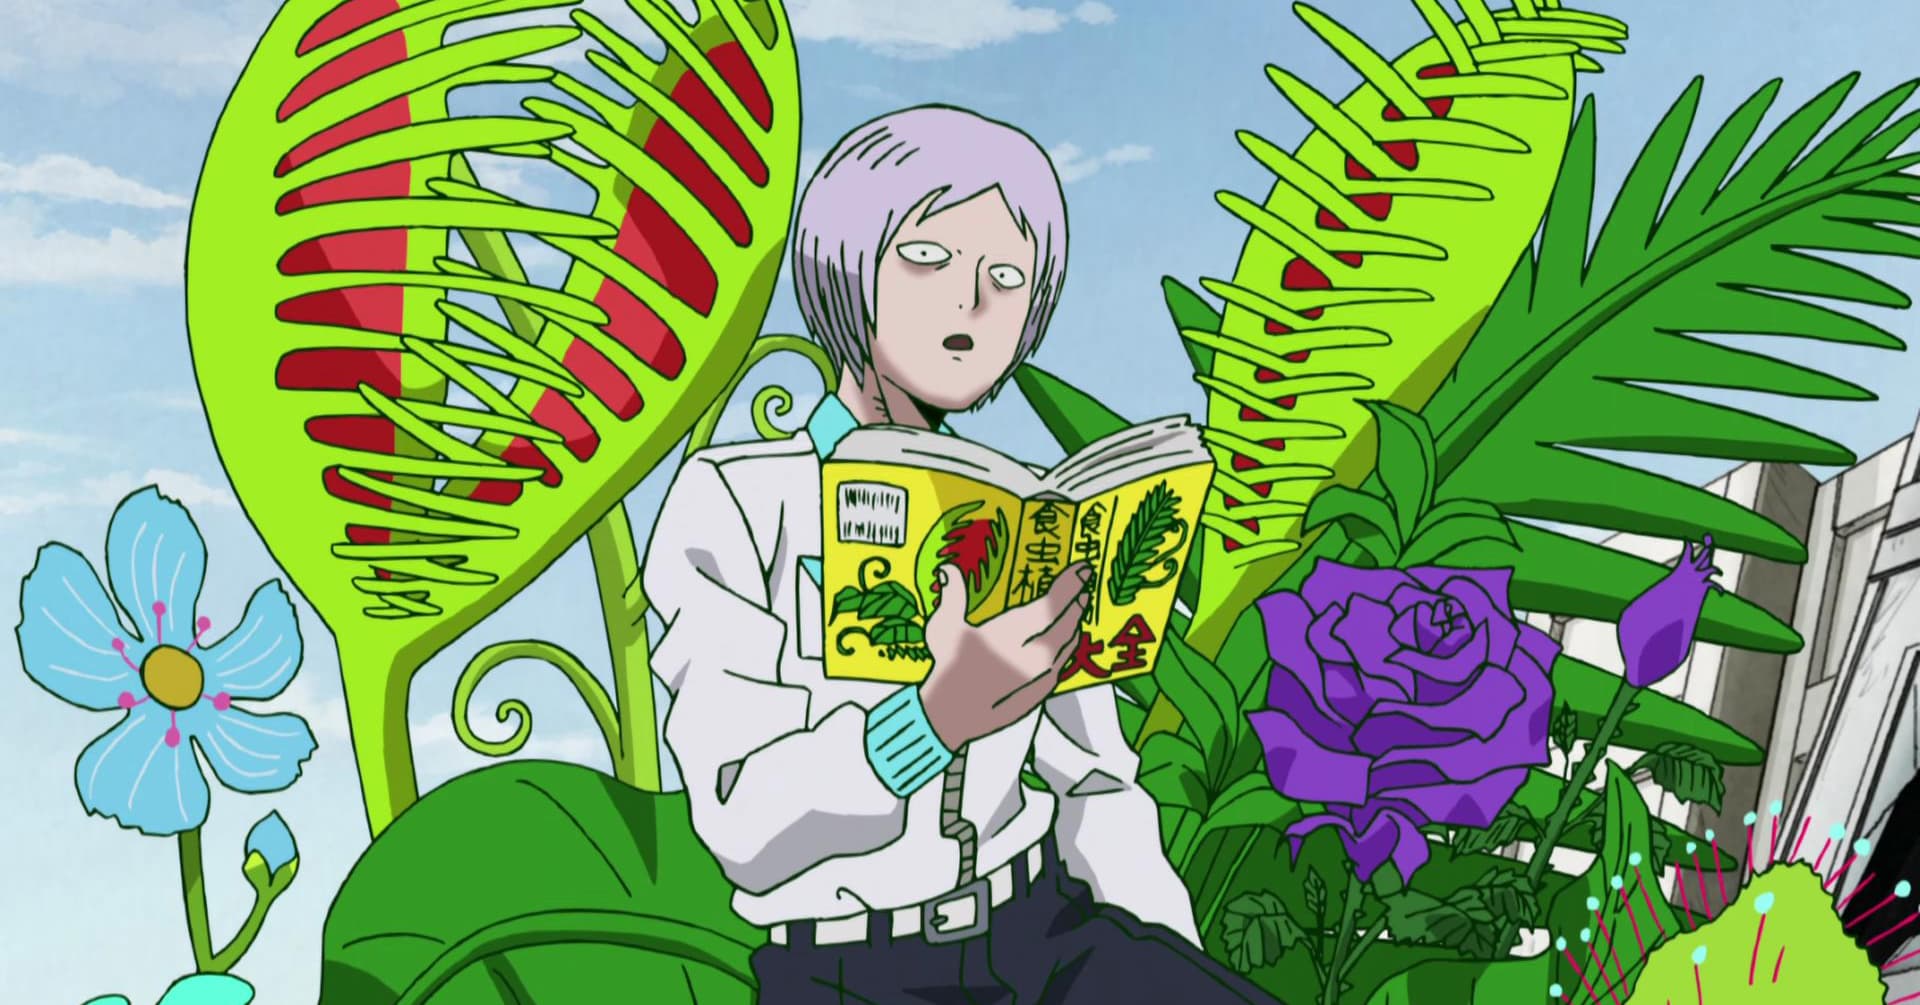 13 Anime Characters Who Can Read Minds